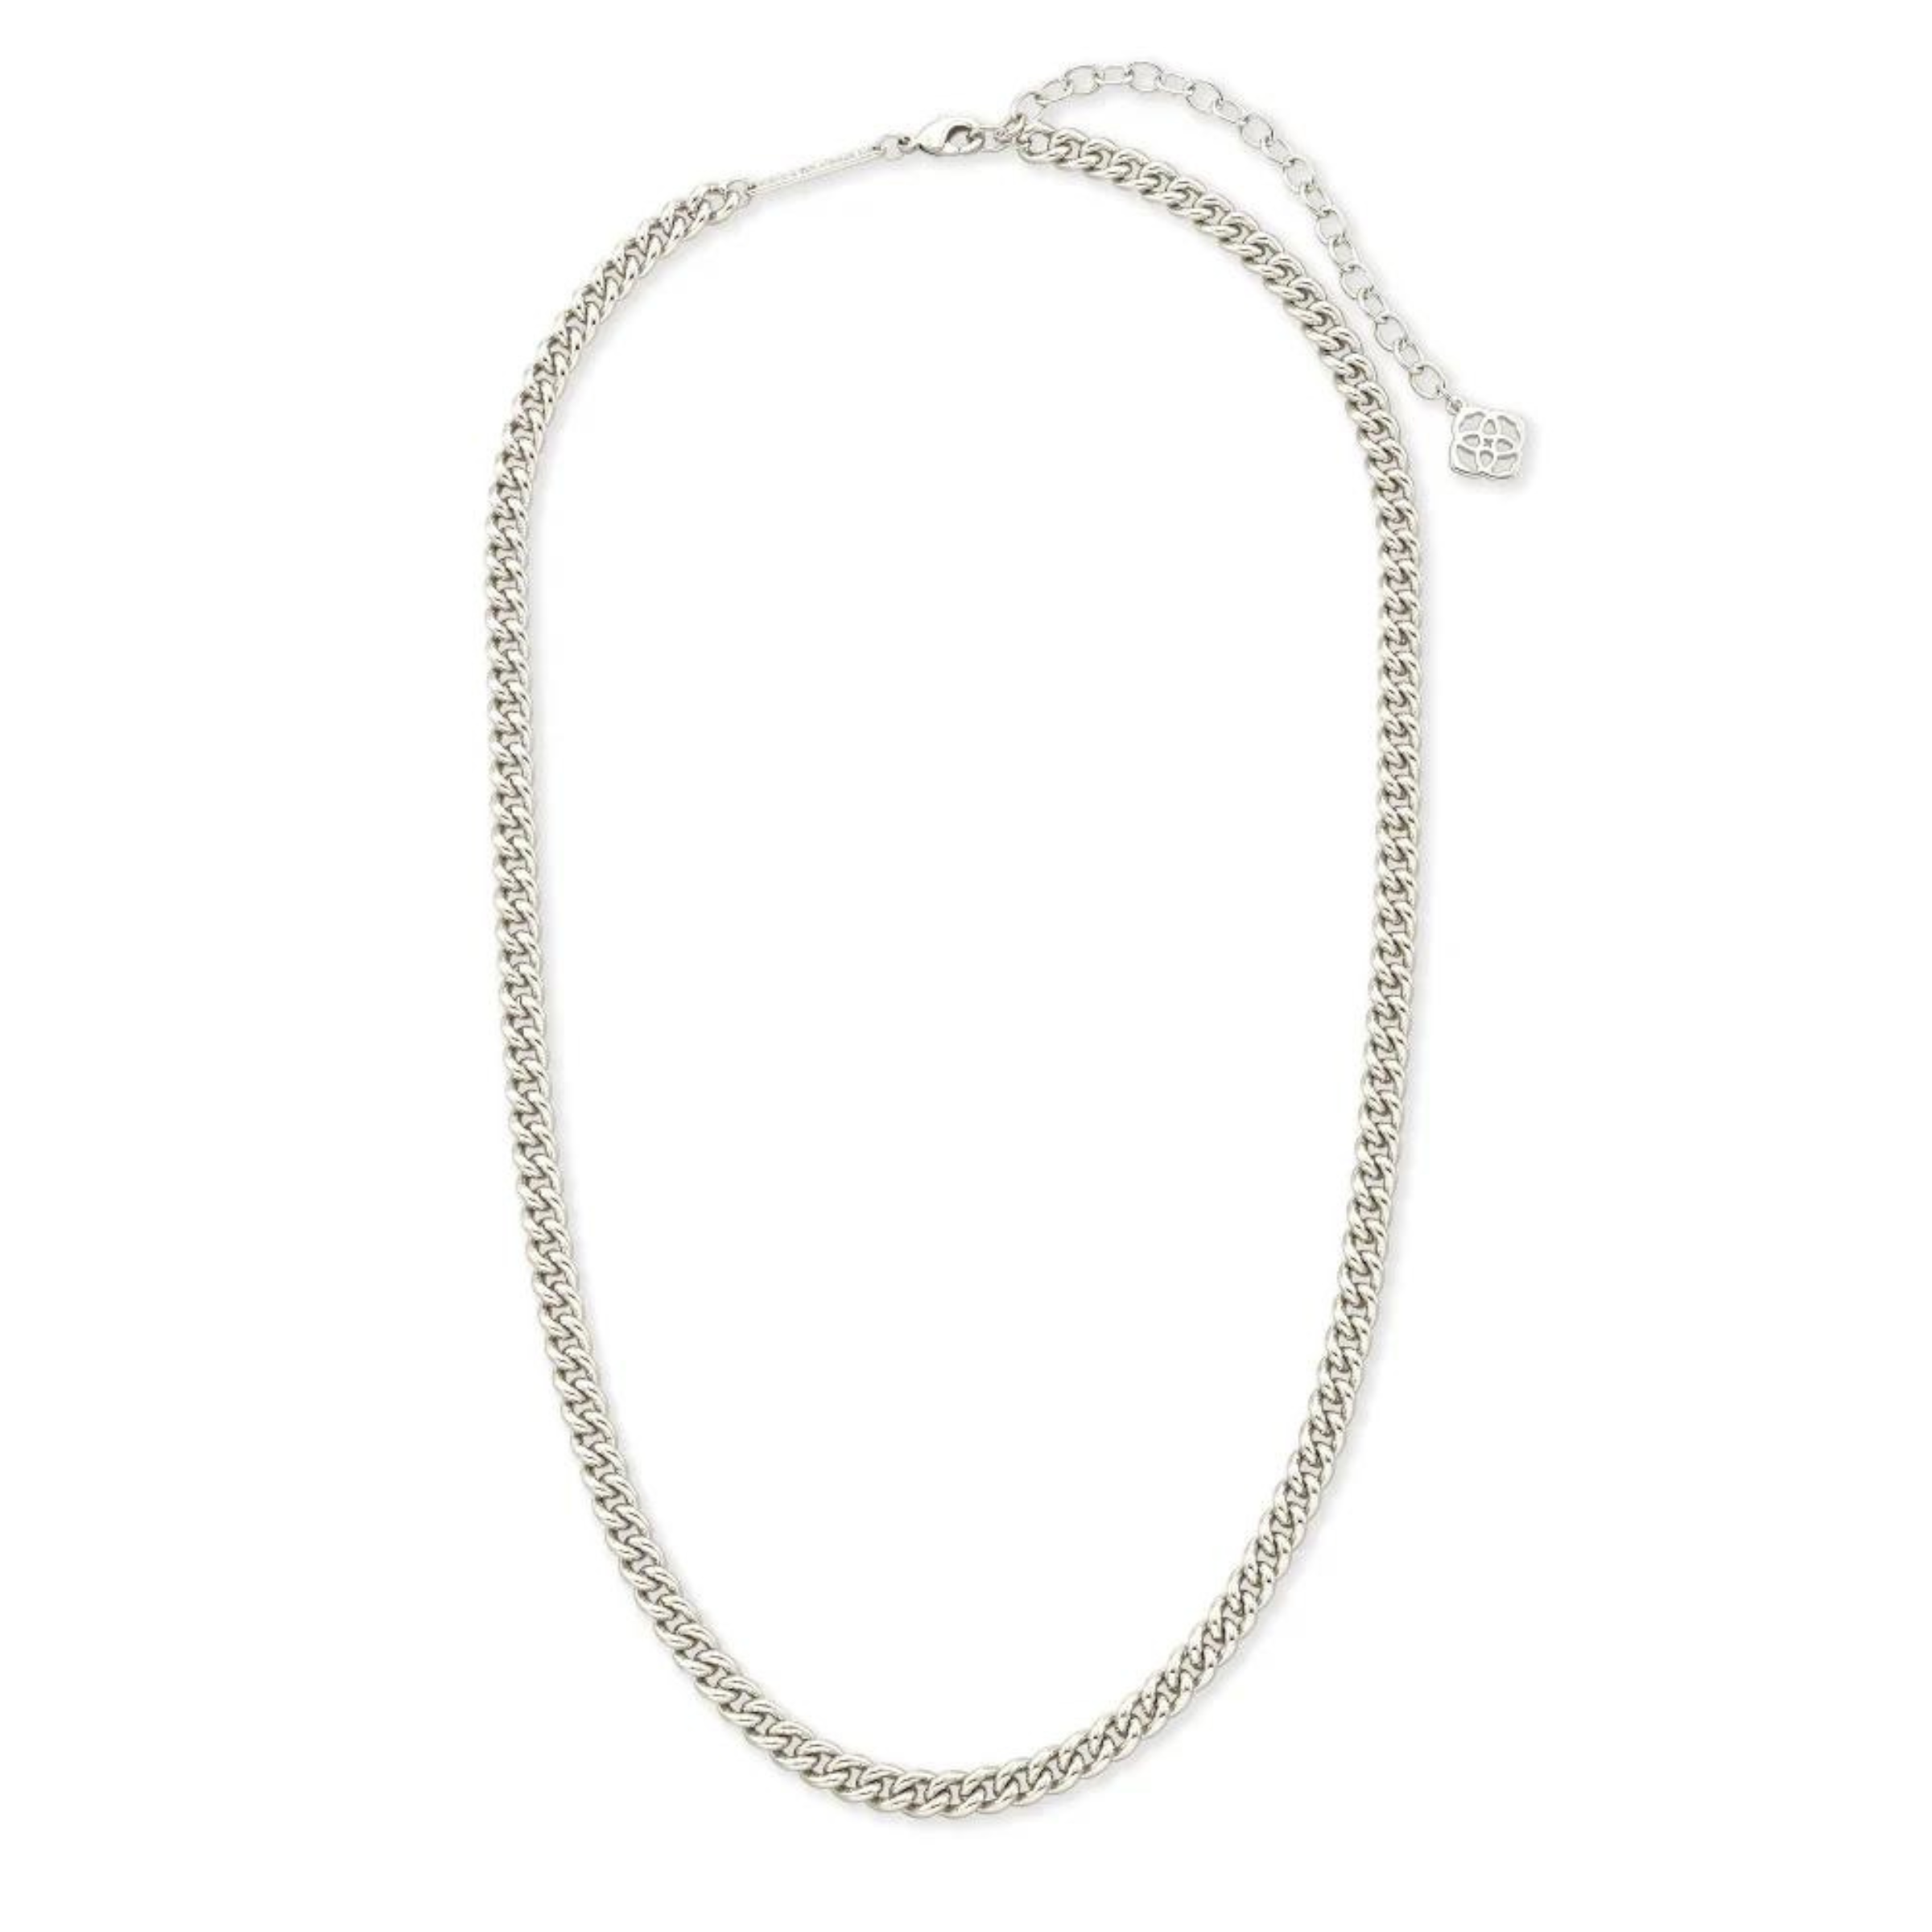 Kendra Scott | Ace Chain Necklace in Silver - Giddy Up Glamour Boutique